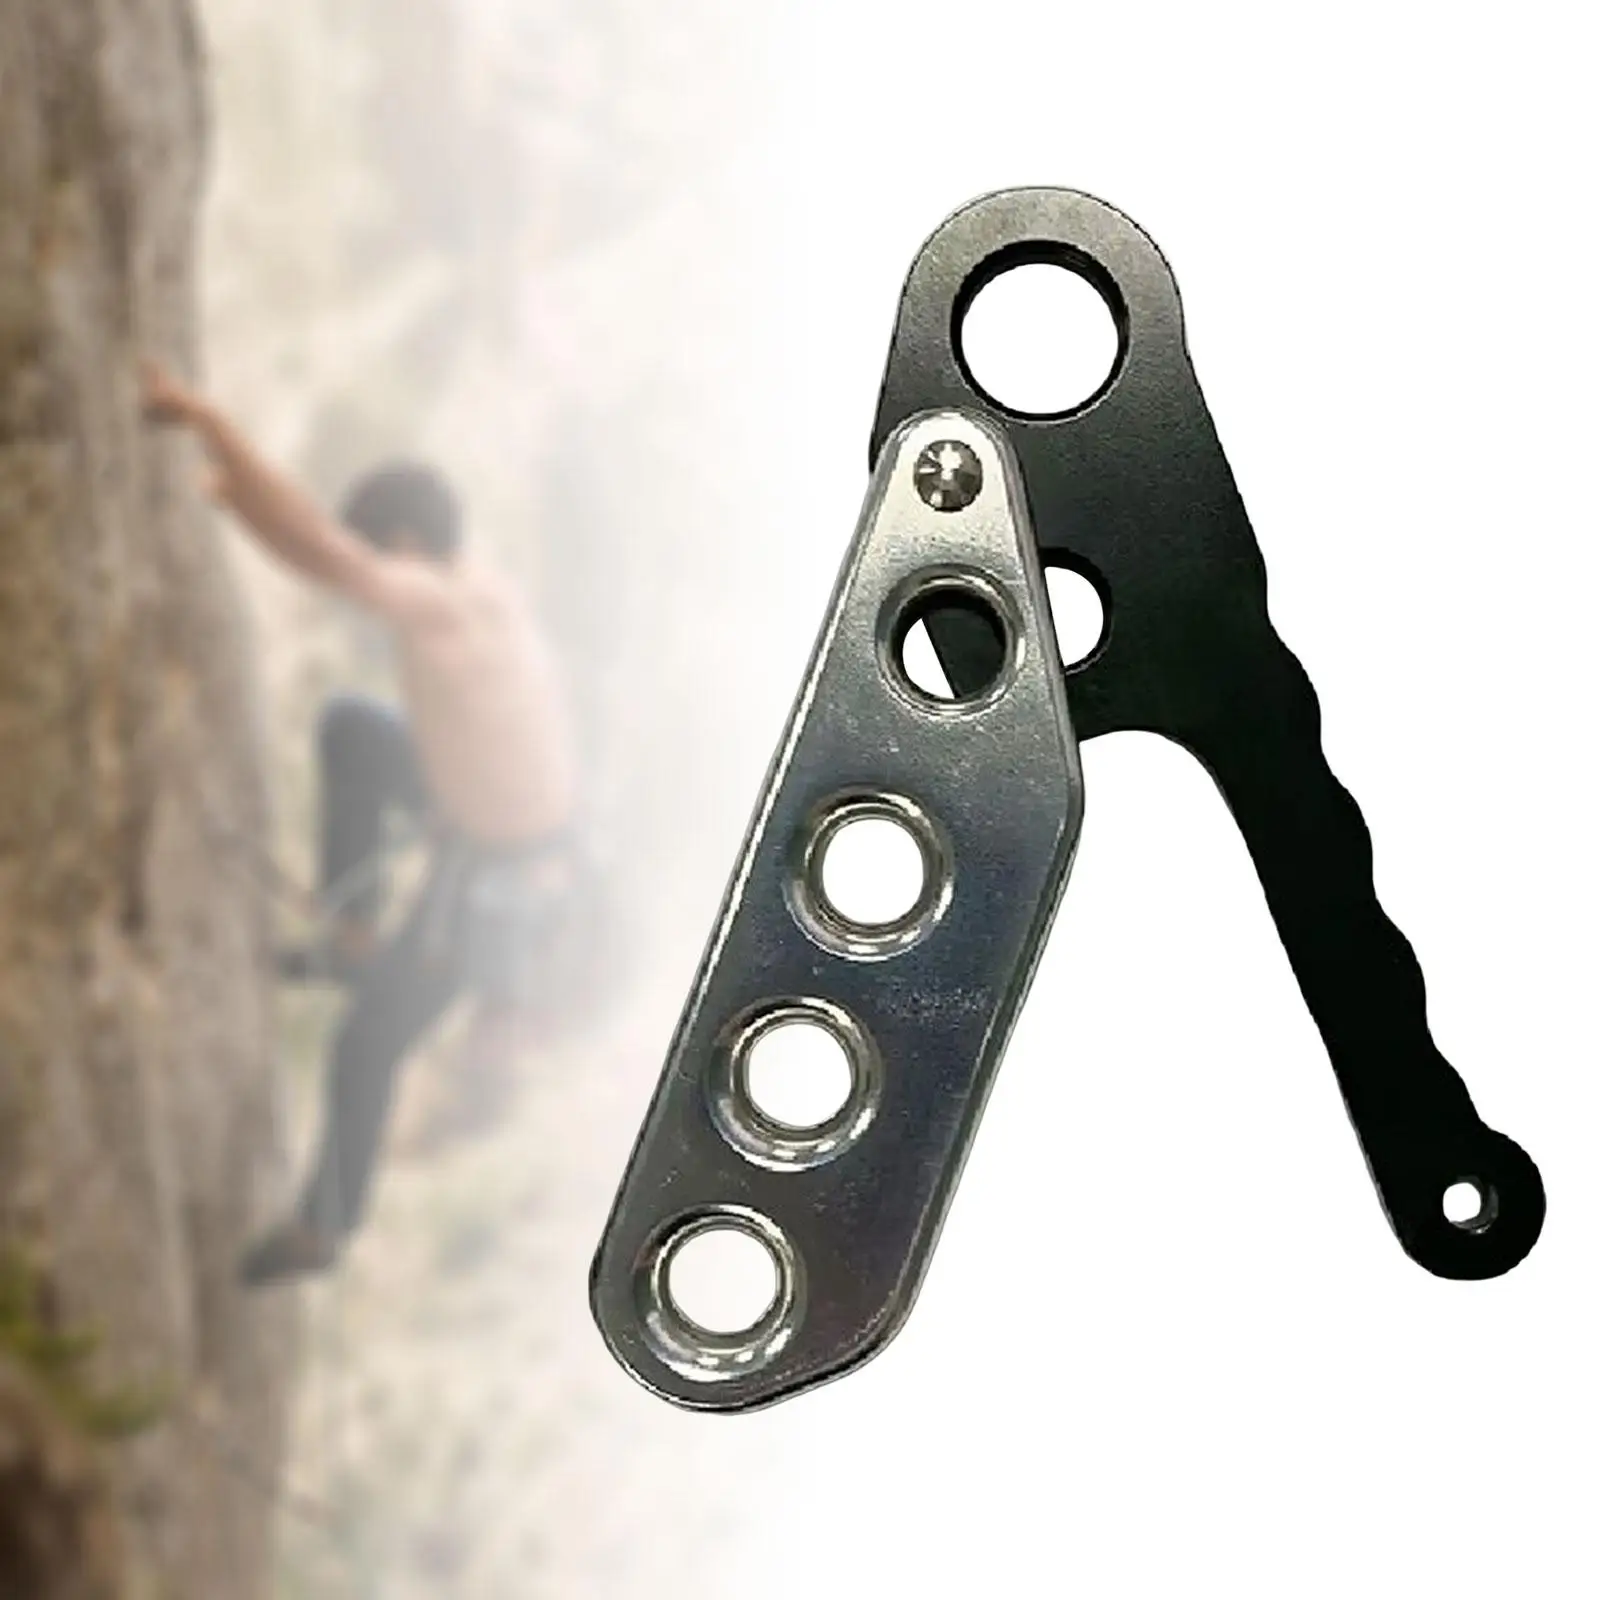 Rock Climbing Descender Belaying Stop Climbing Rope Accessory for Arborist